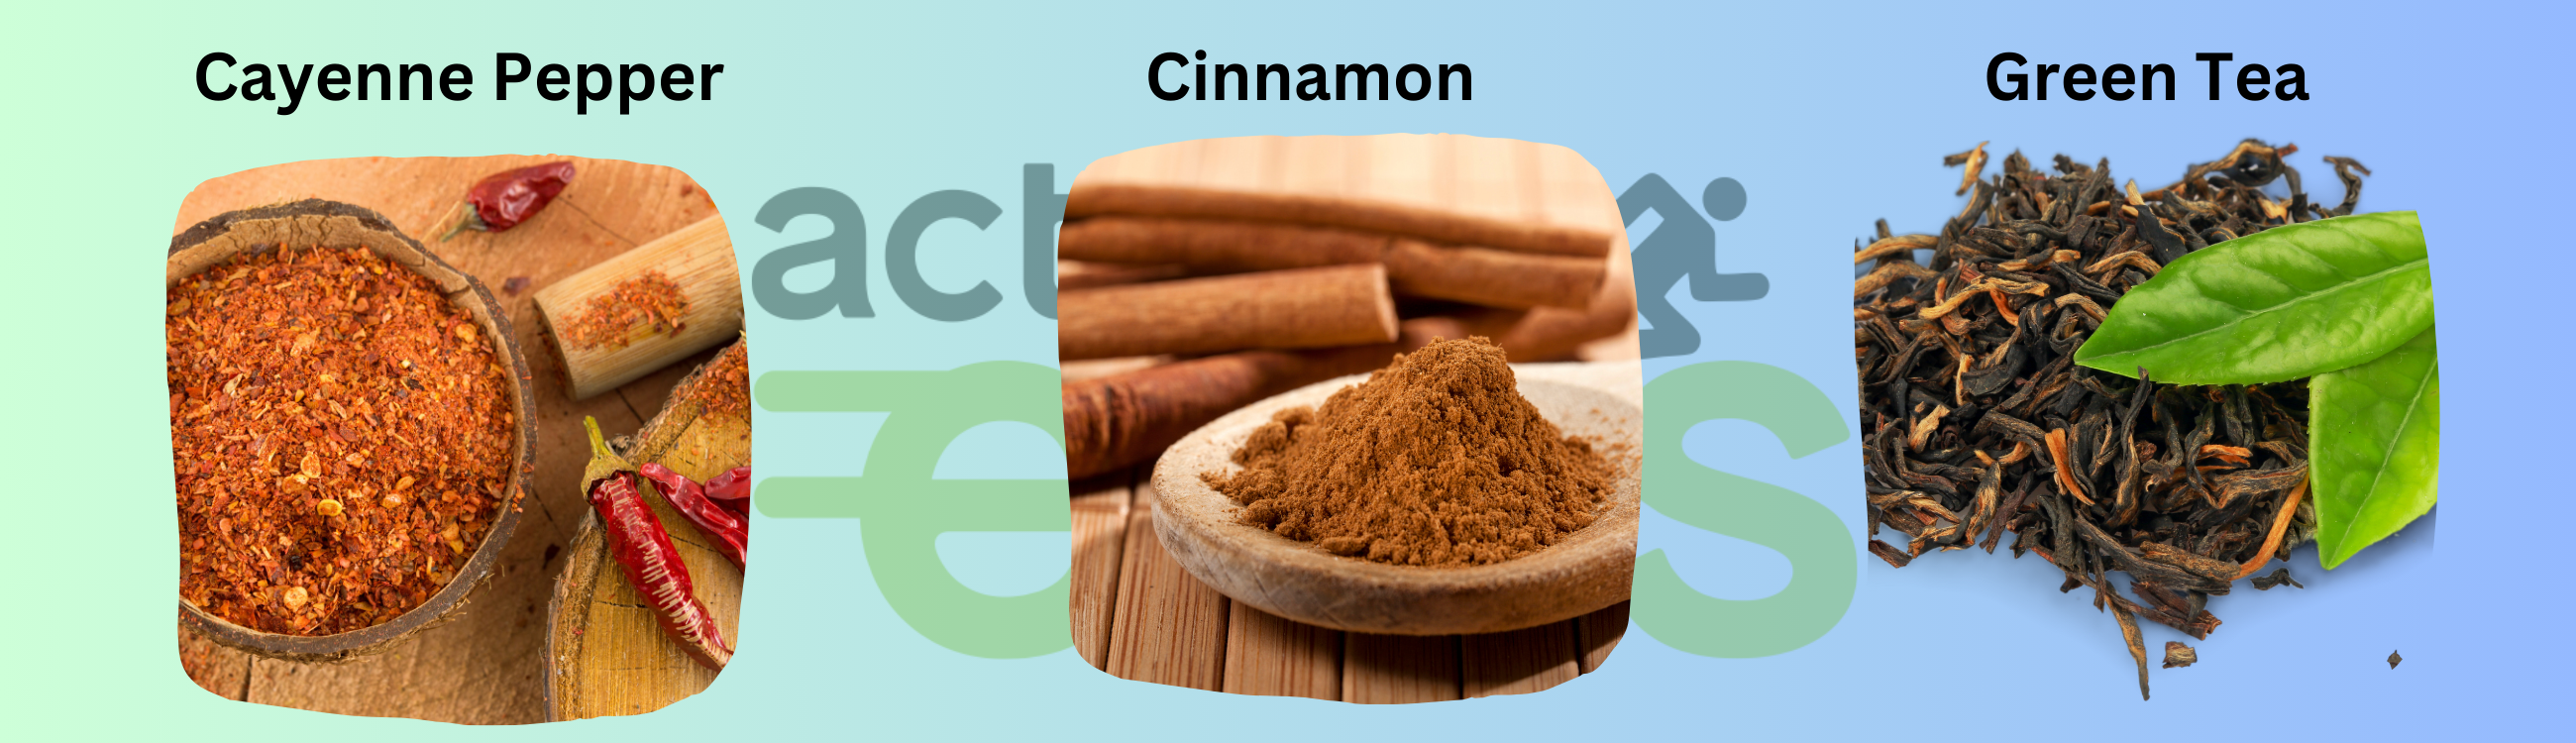 Picture of cayenne pepper , cinnamon, and green tea.